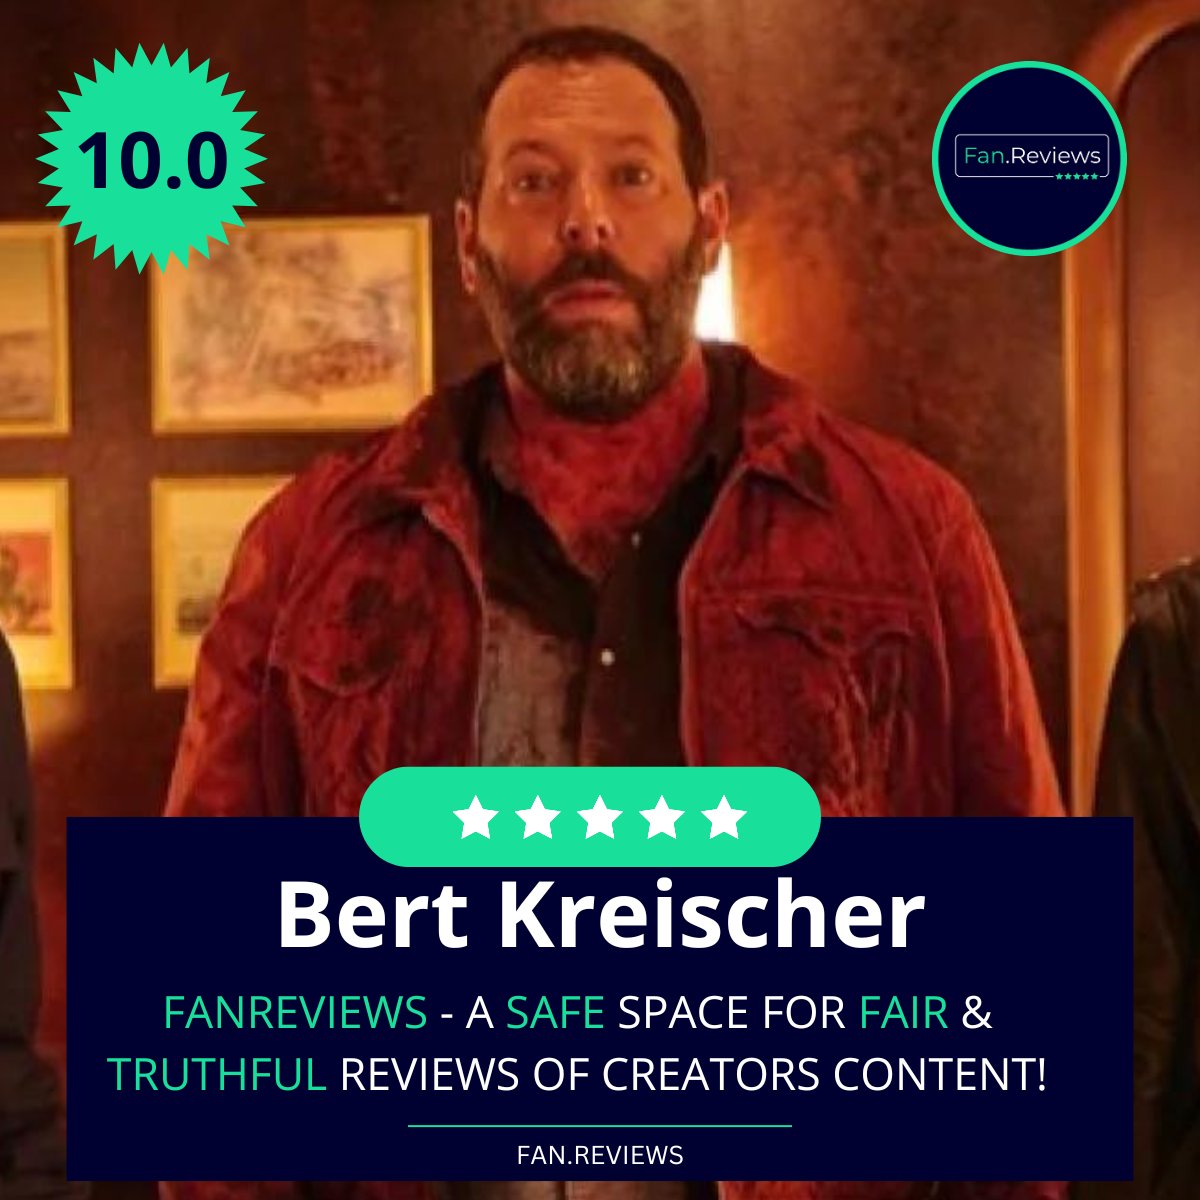 Congratulations to .@bertkreischer for having a 10.0 rating on FanReviews. Check out the reviews on our site 🎉 FanReviews - A safe space for fair & truthful reviews of Creator content! 💯 Profile link:👉fan.reviews/creator/comedy…